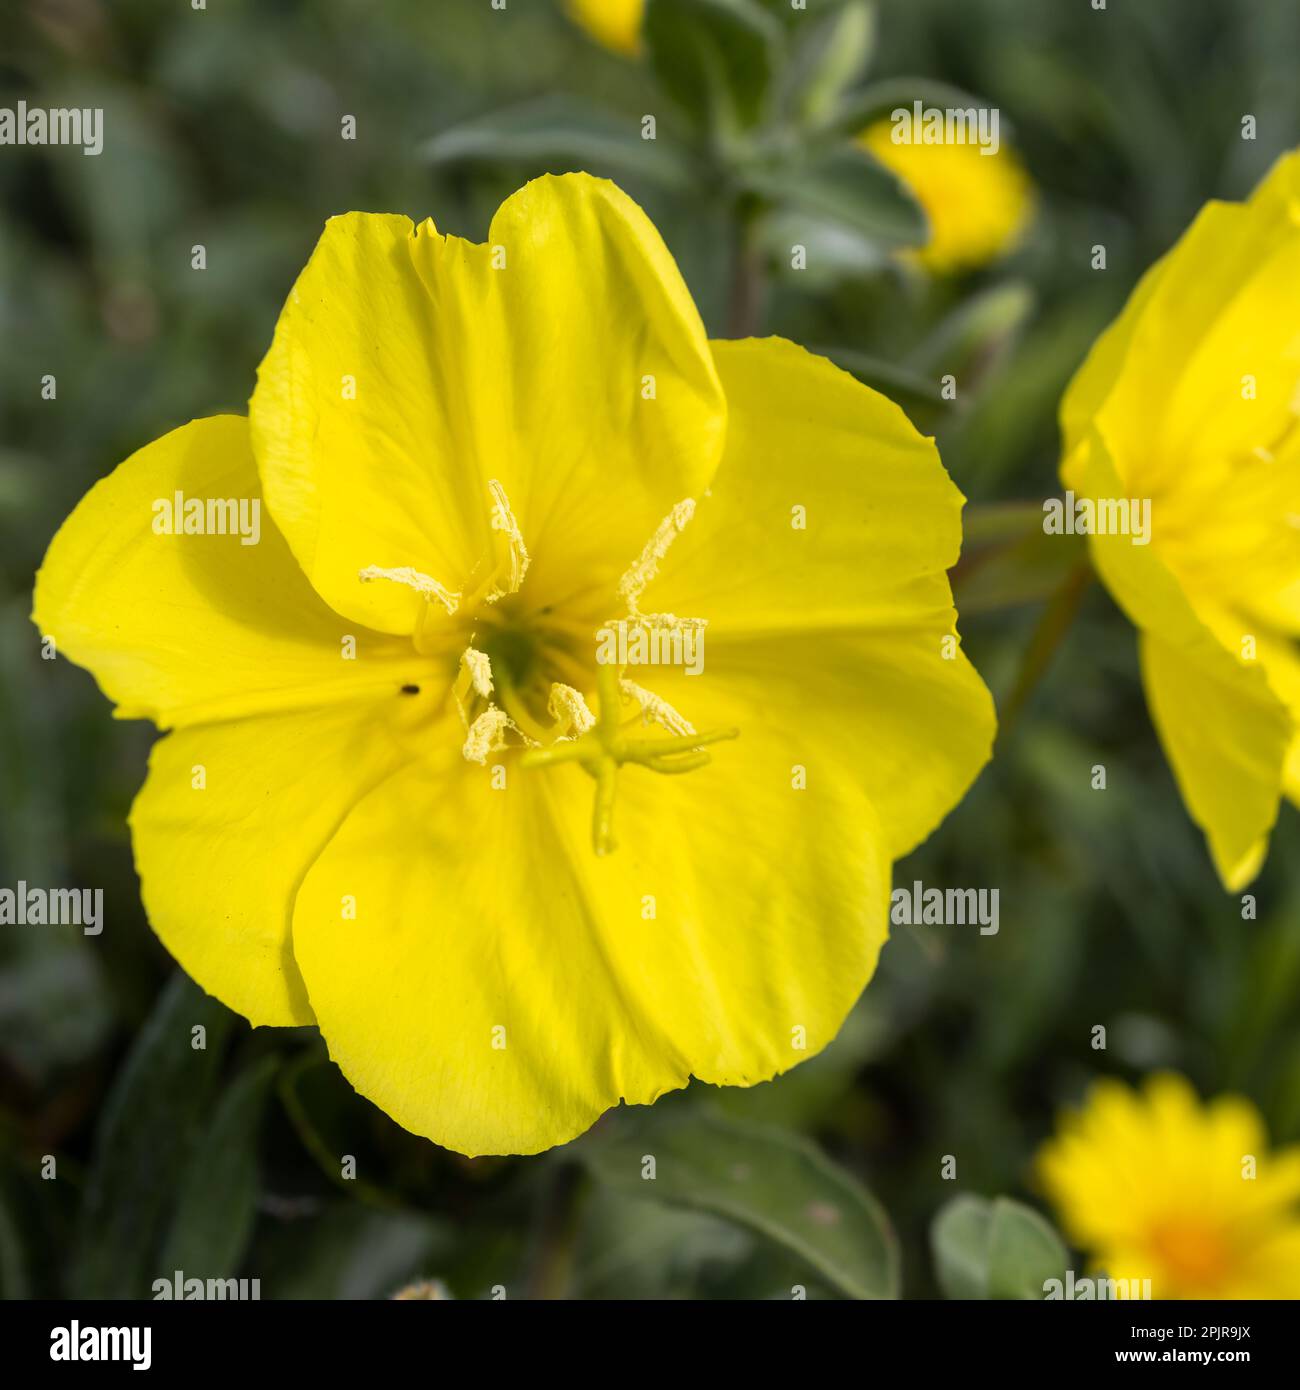 Oenothera drummondii is species of shrub in the family Onagraceae. They have a self-supporting growth form. They are native to The Contiguous United S Stock Photo